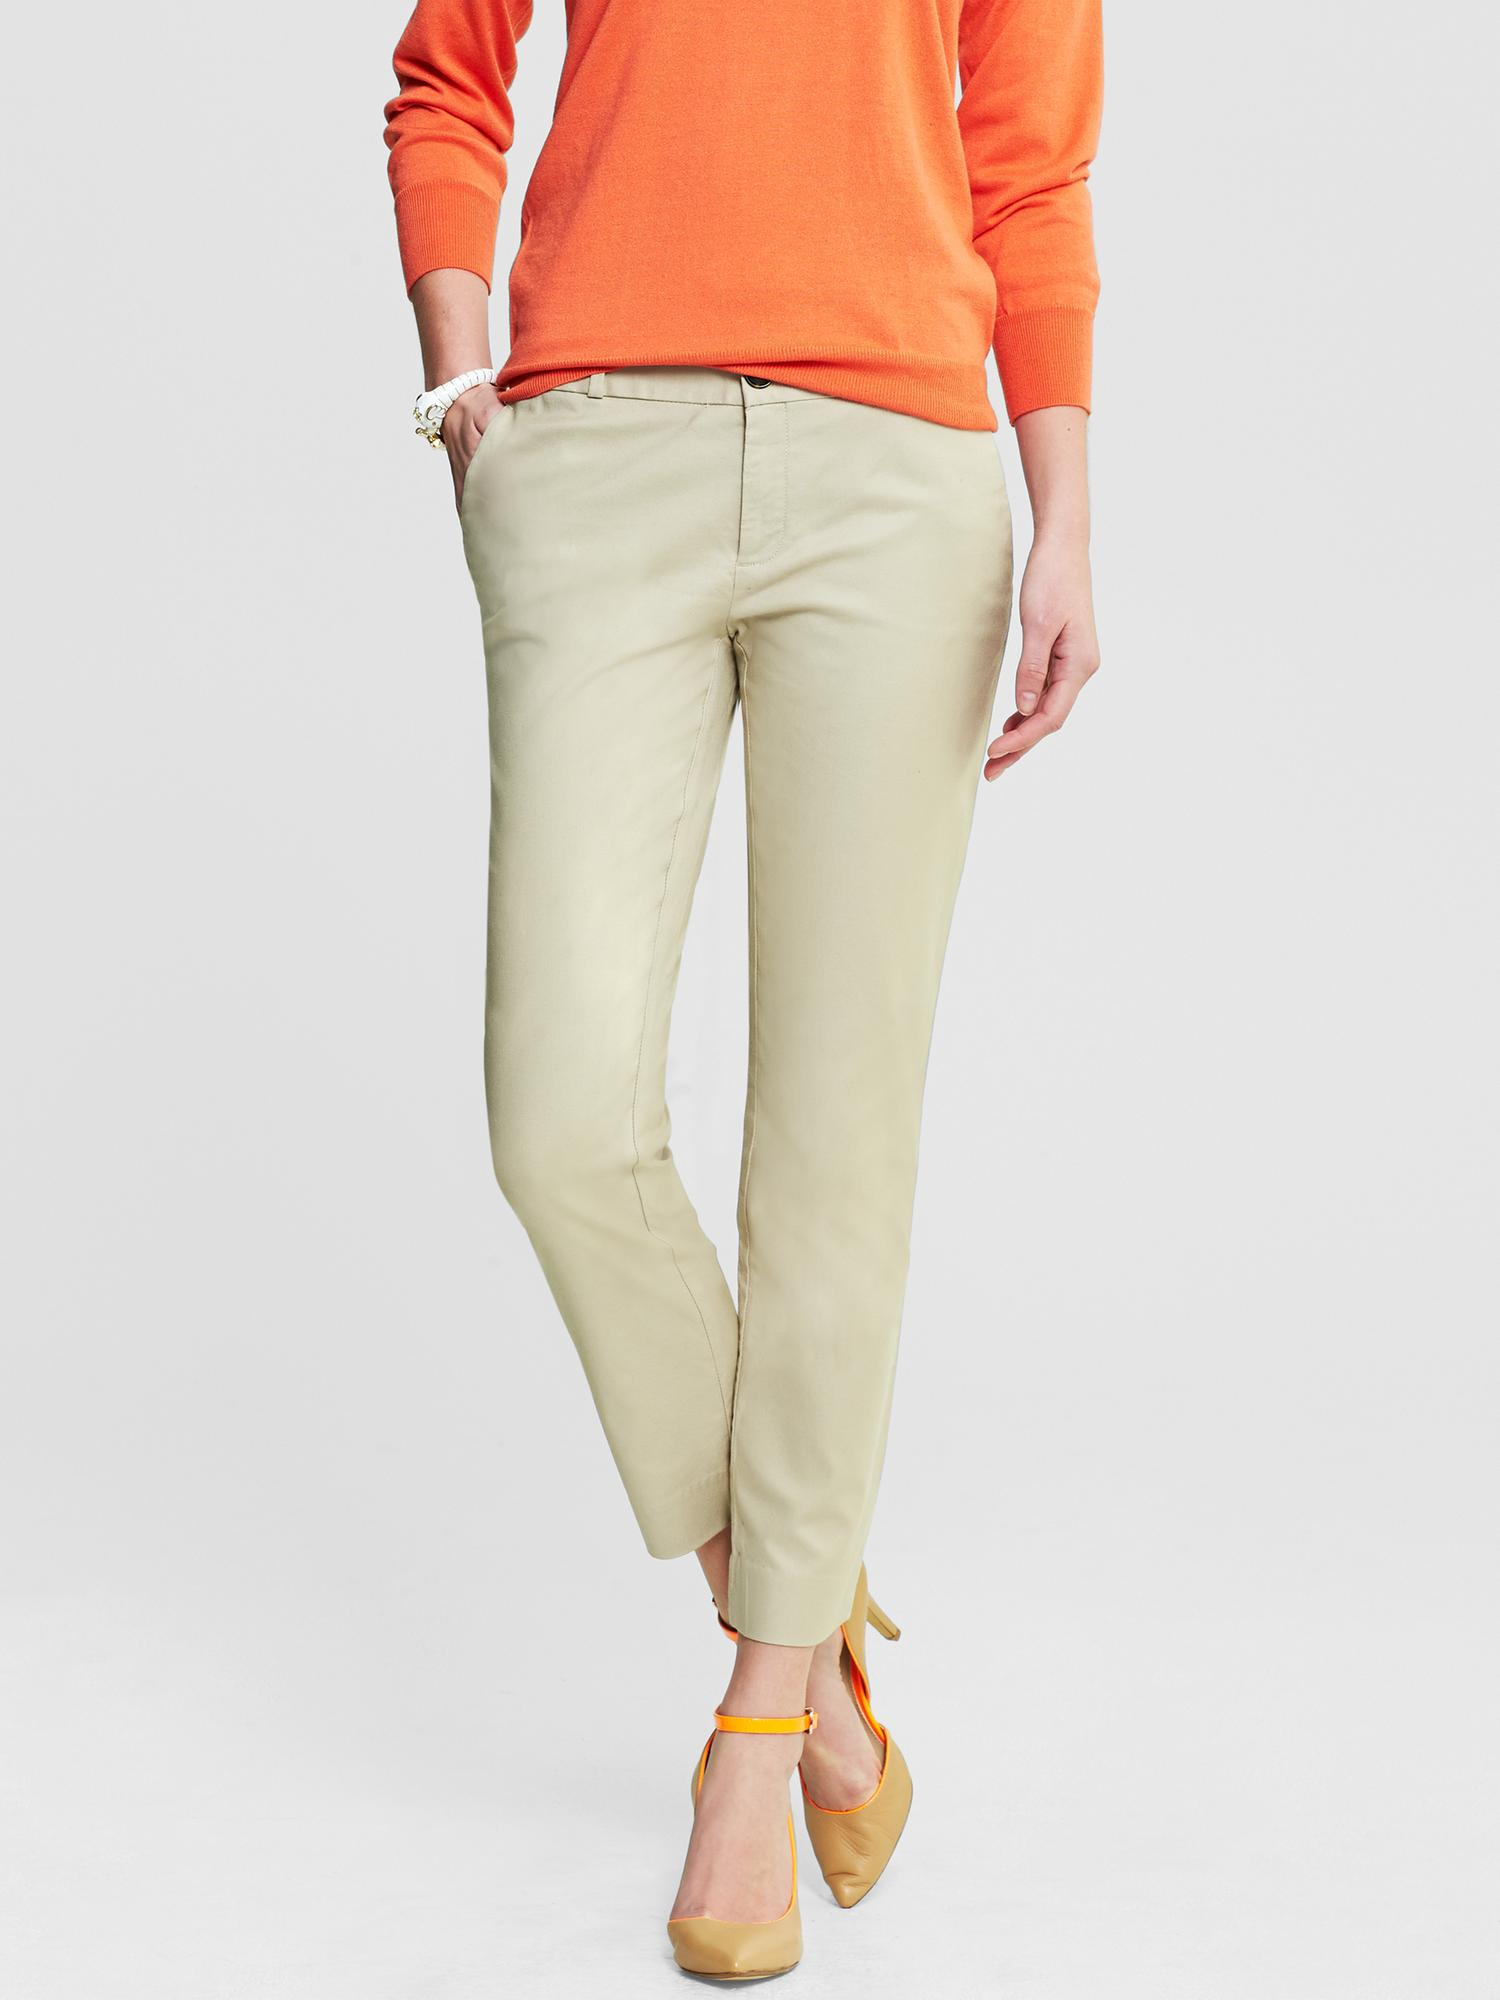 Banana Republic Camden Fit Ankle Pant In Beige Barley Lyst